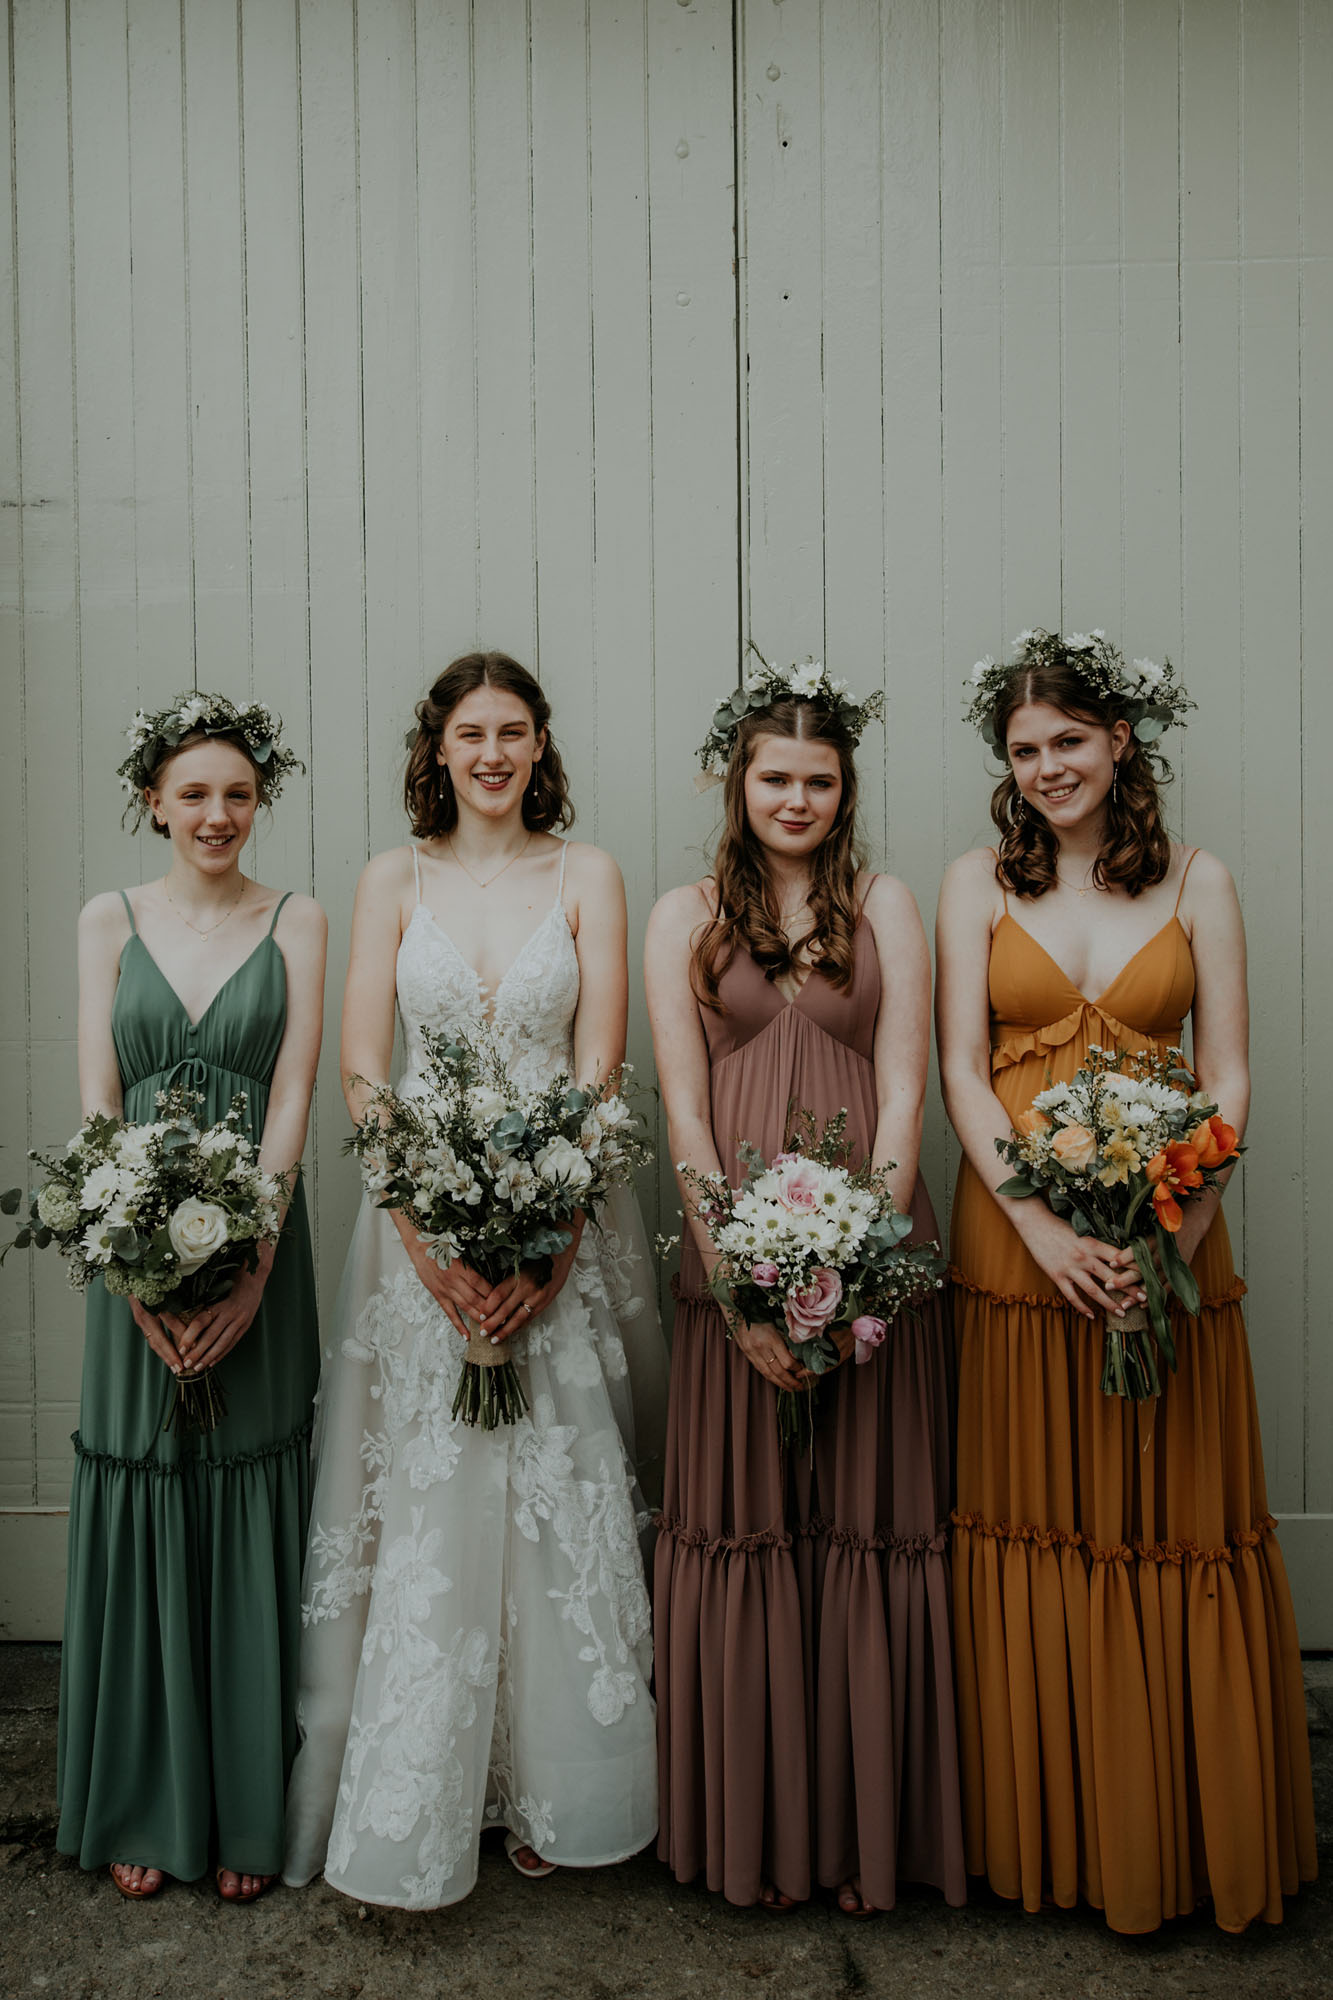 Bride standing with bridesmaids in green and ochre wedding dresses